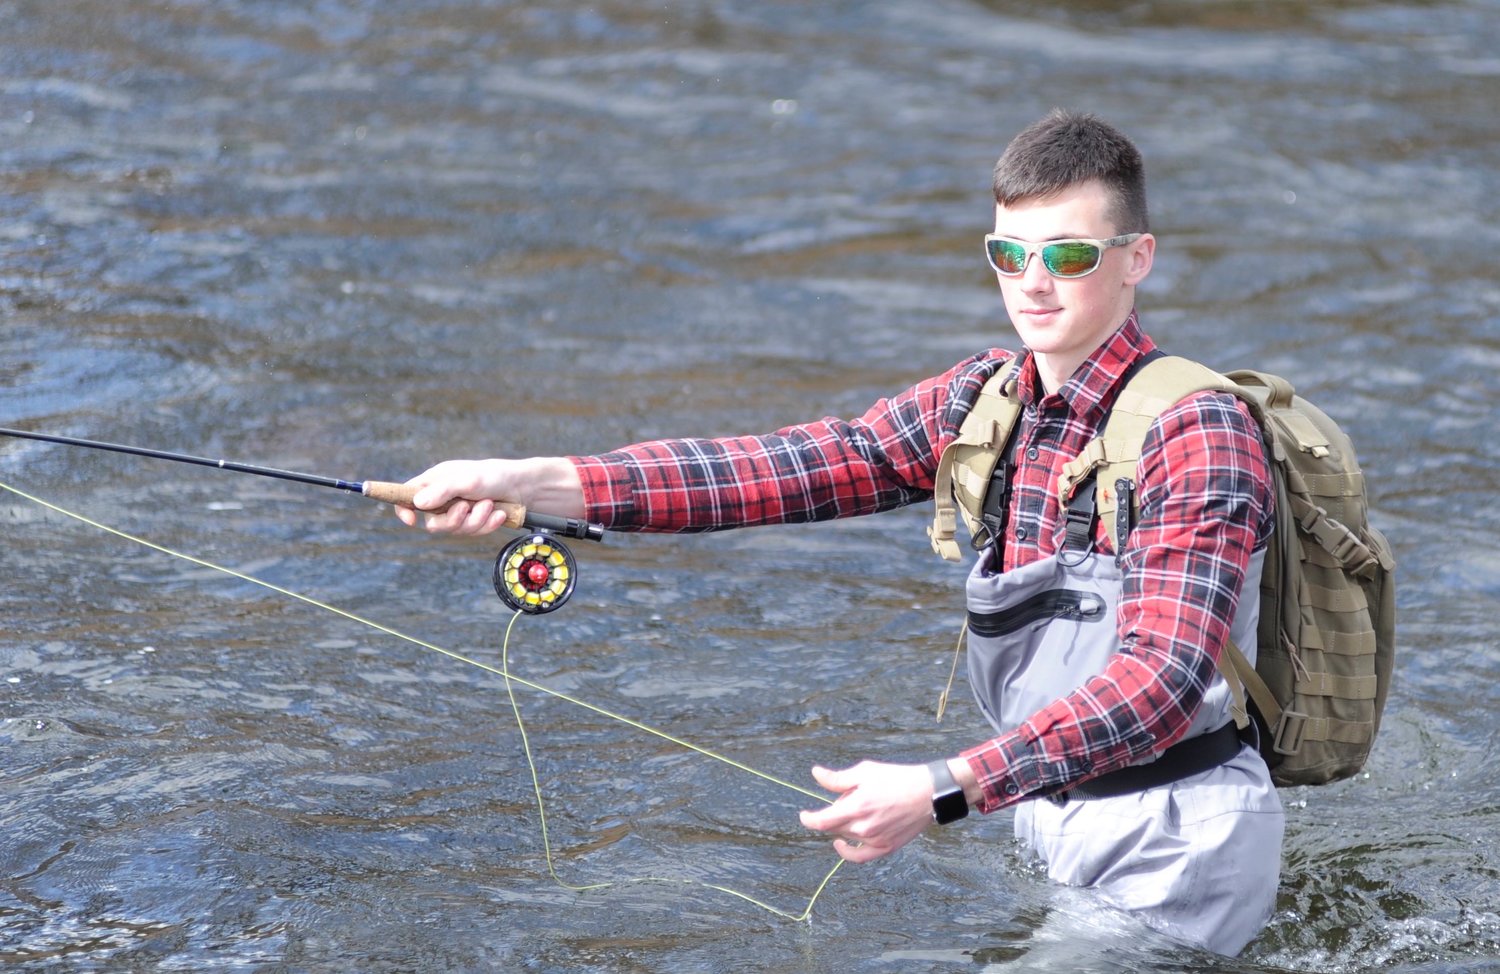 U.S. Marine Corps Lance Corporal Konstantin Sergeer was a first-time fly fisherman at Dette Pool.